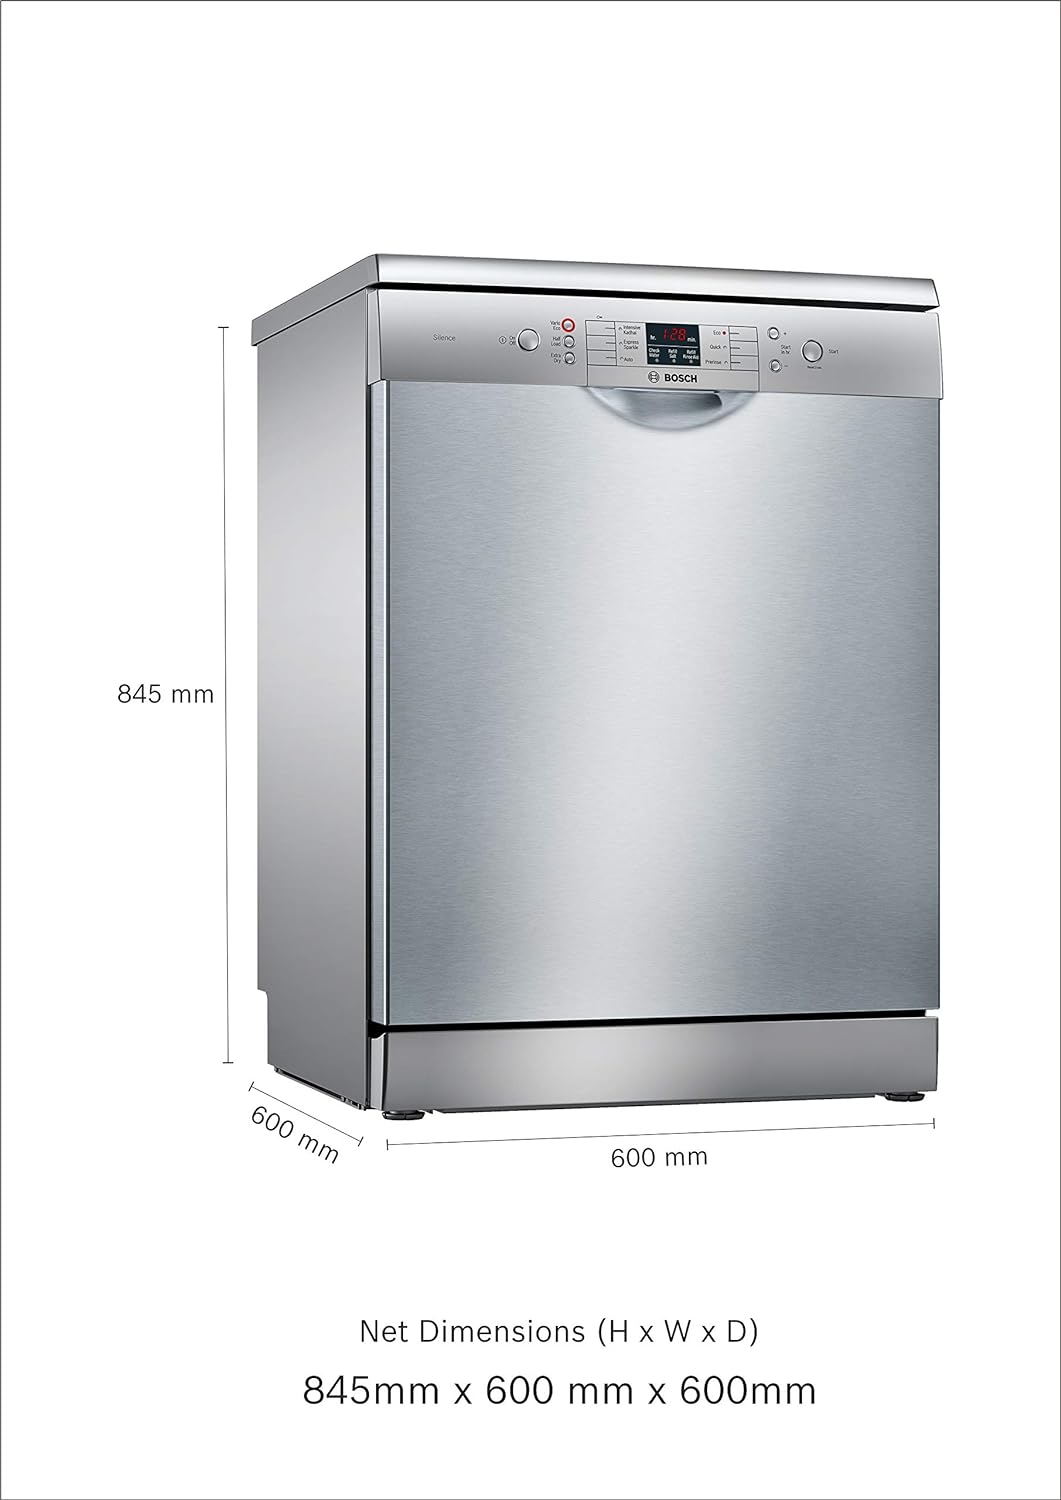 Bosch 13 Place Settings, Free Standing Dishwasher (SMS66GI01I, Silver Inox), extra dry and hygienic wash